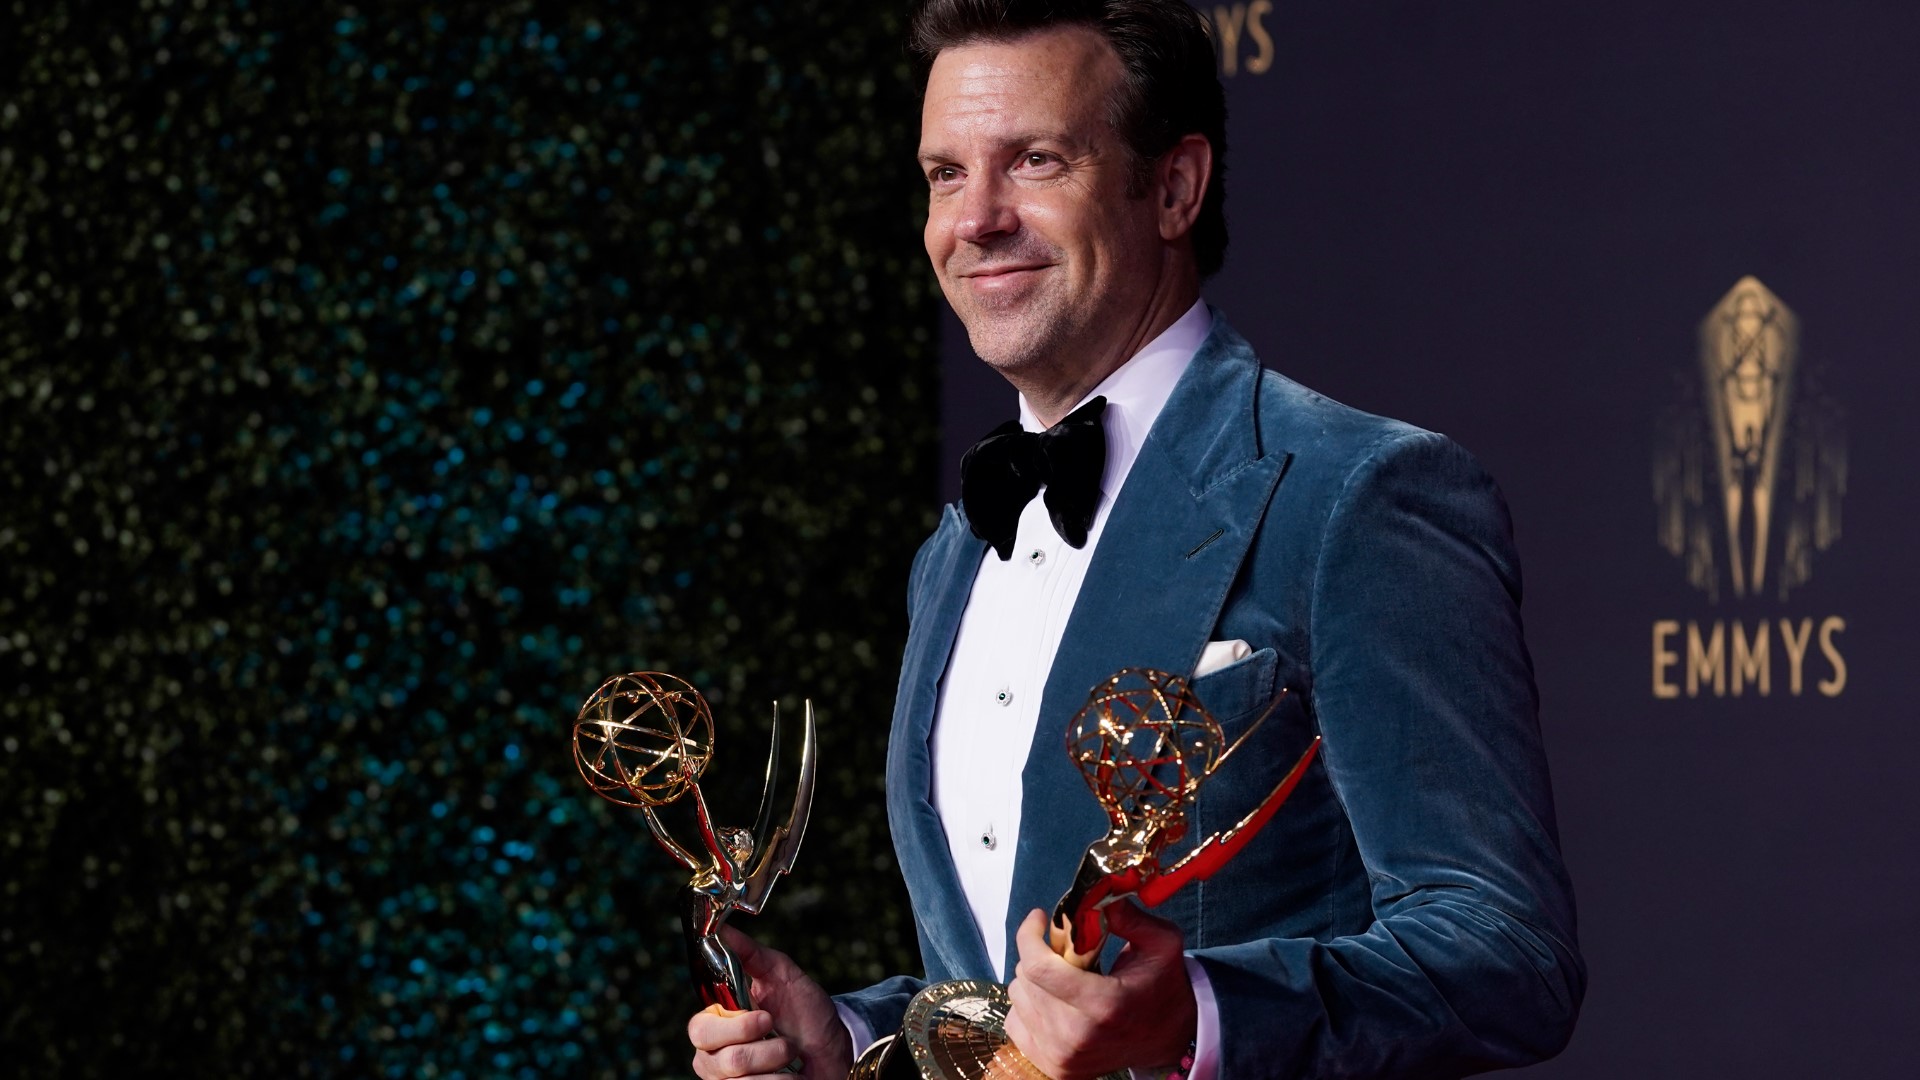 Netflix won 44 Emmy Awards, equaling the broadcast network record set back in 1974, by CBS.